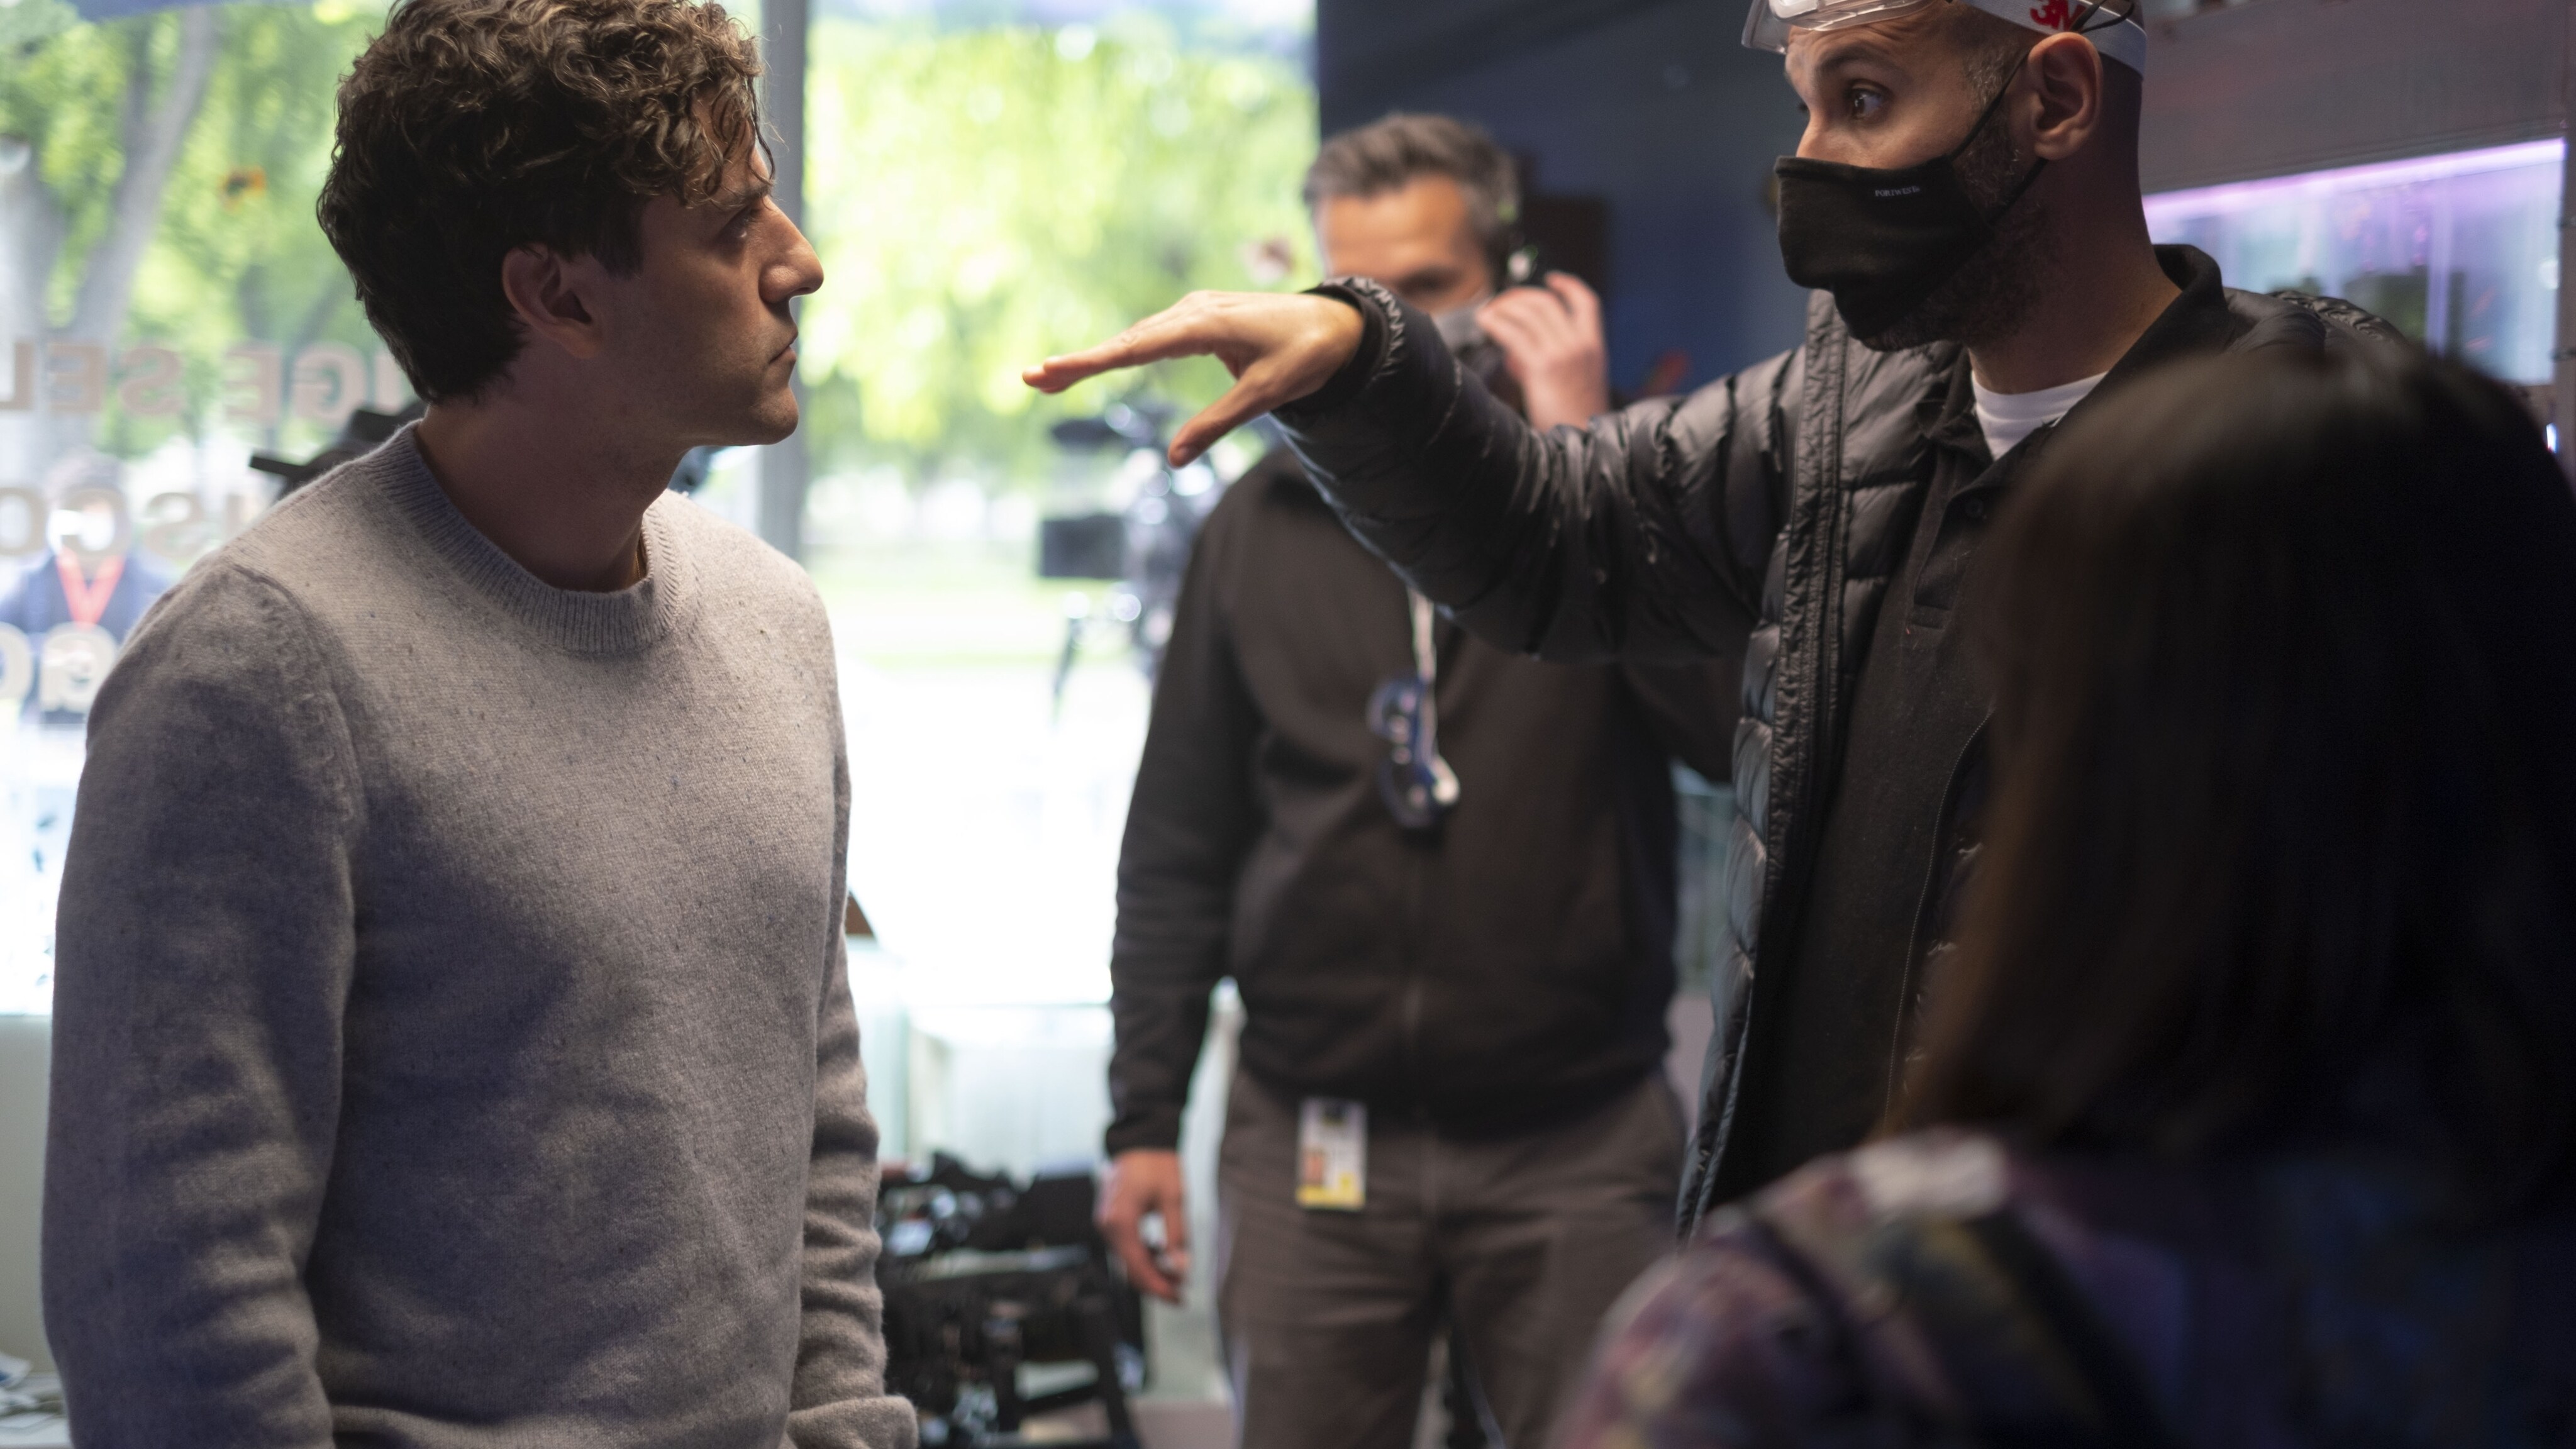 Oscar Isaac and Director Mohamed Diab on the set of Marvel Studios' MOON KNIGHT, exclusively on Disney+. Photo by Gabor Kotschy. ©Marvel Studios 2022. All Rights Reserved.